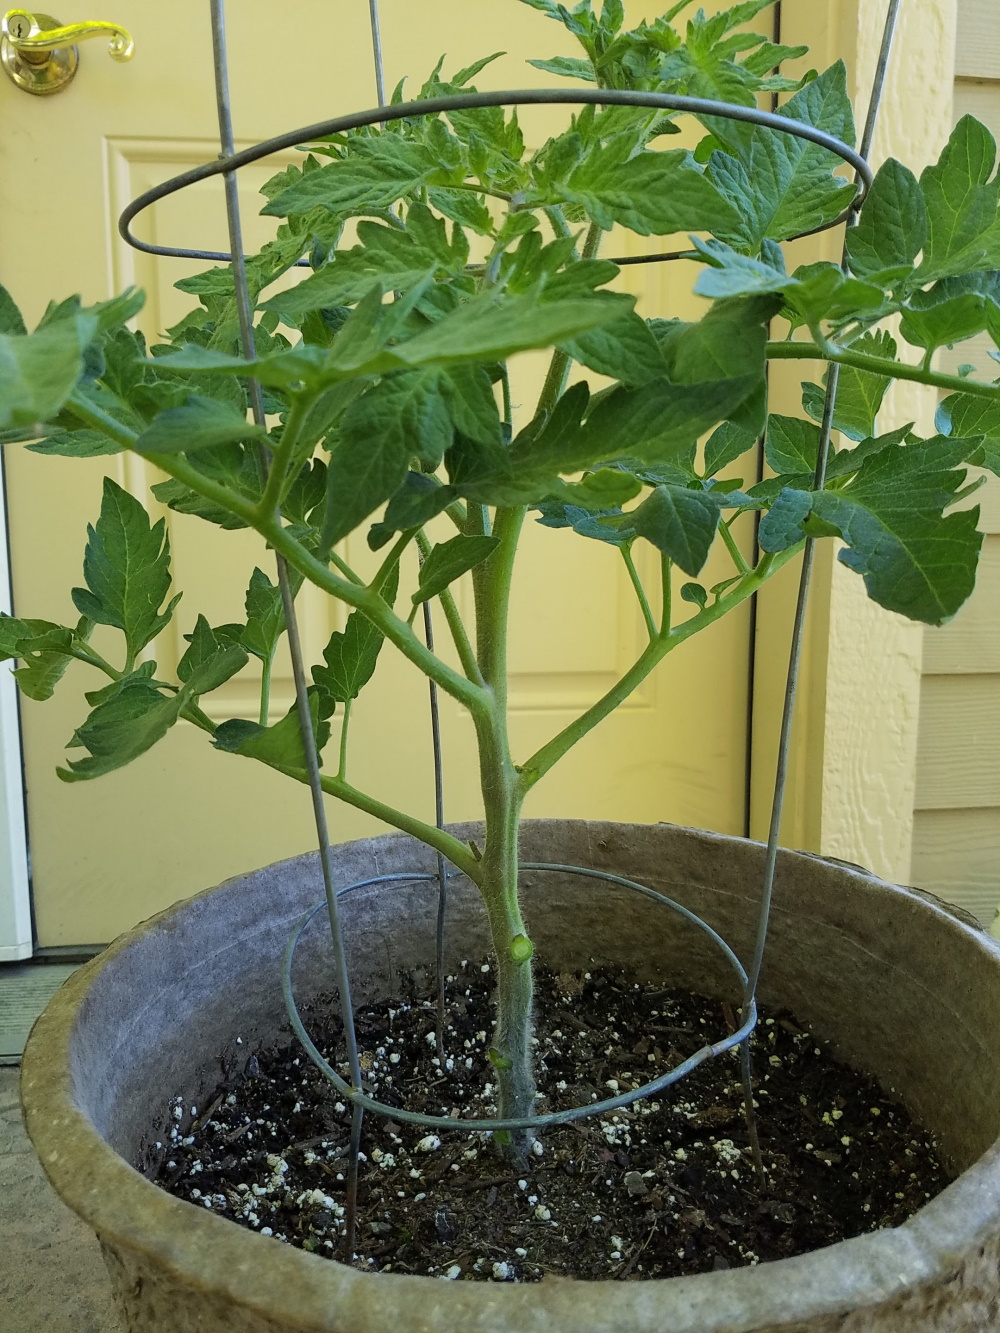 Lower leaves pruned from tomato | The Coeur d Alene Coop